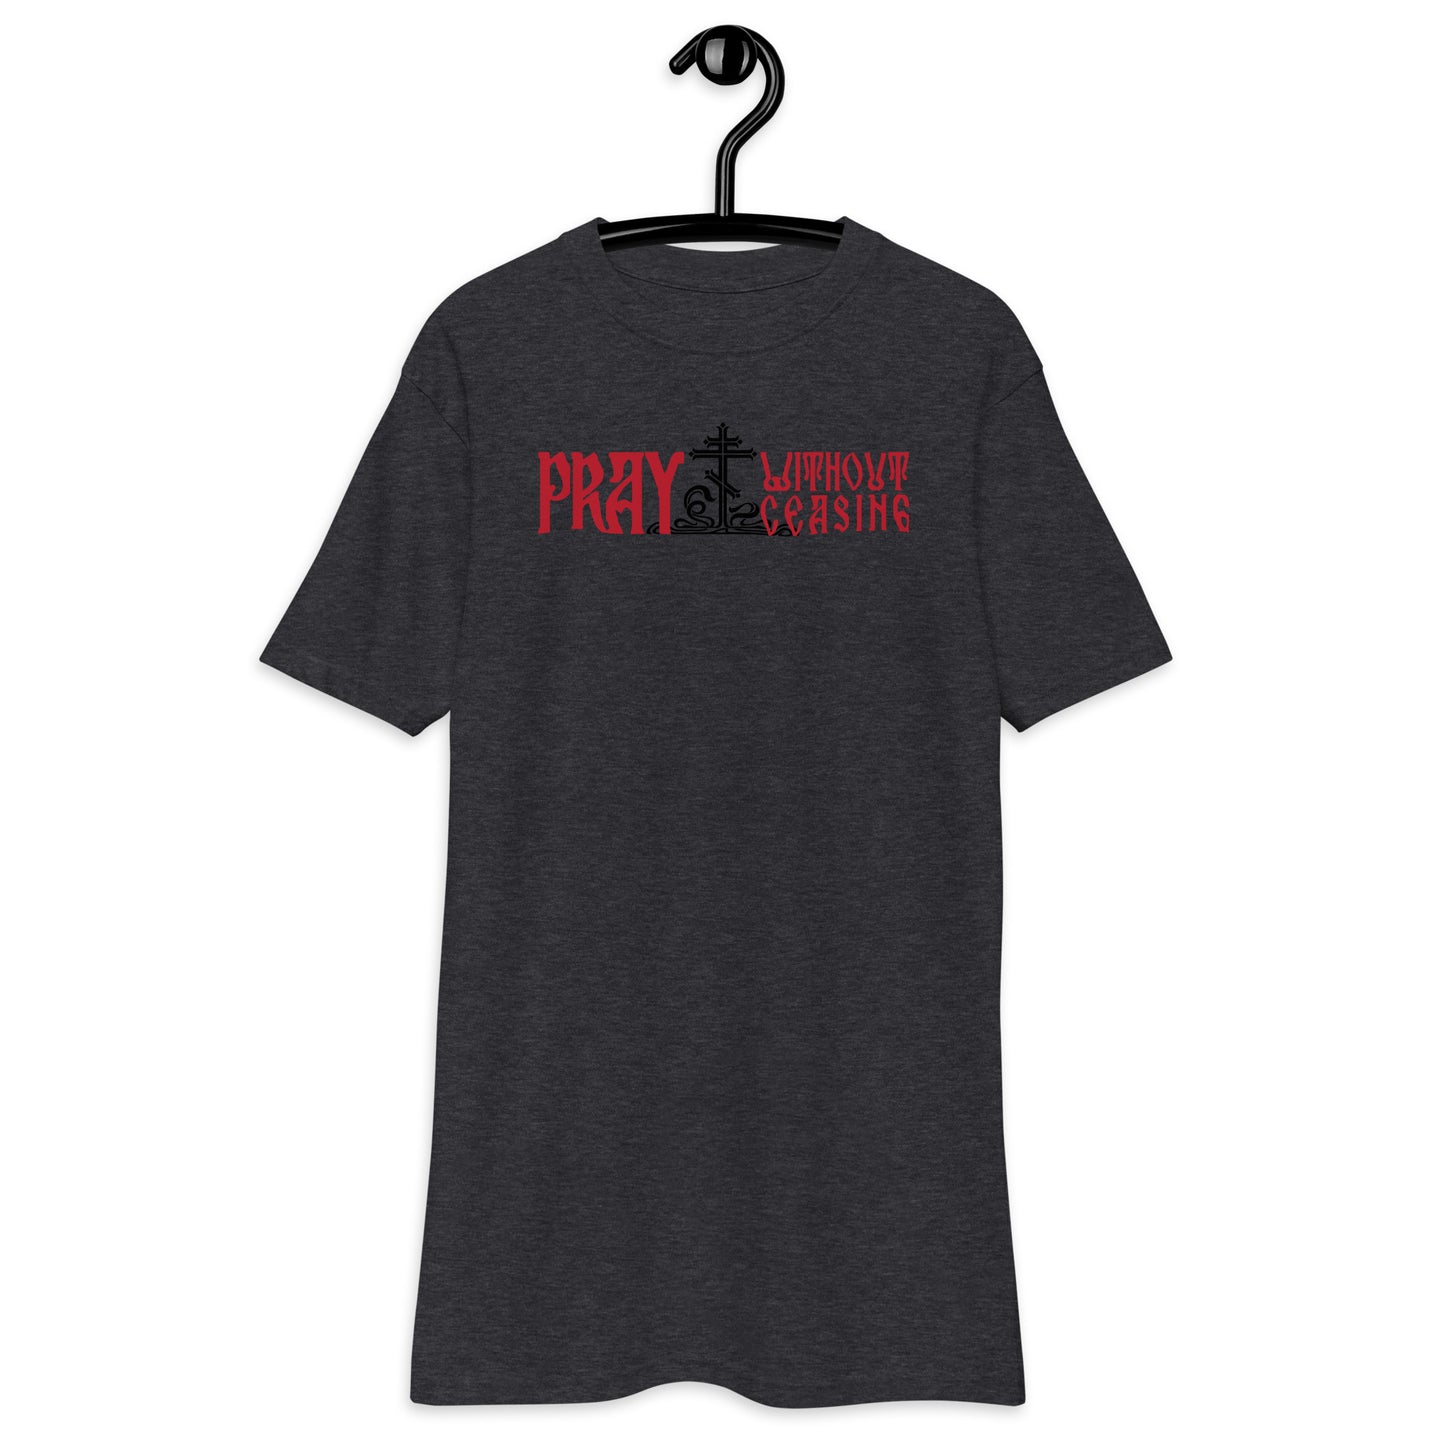 pray ☦ without ceasing premium heavyweight tee